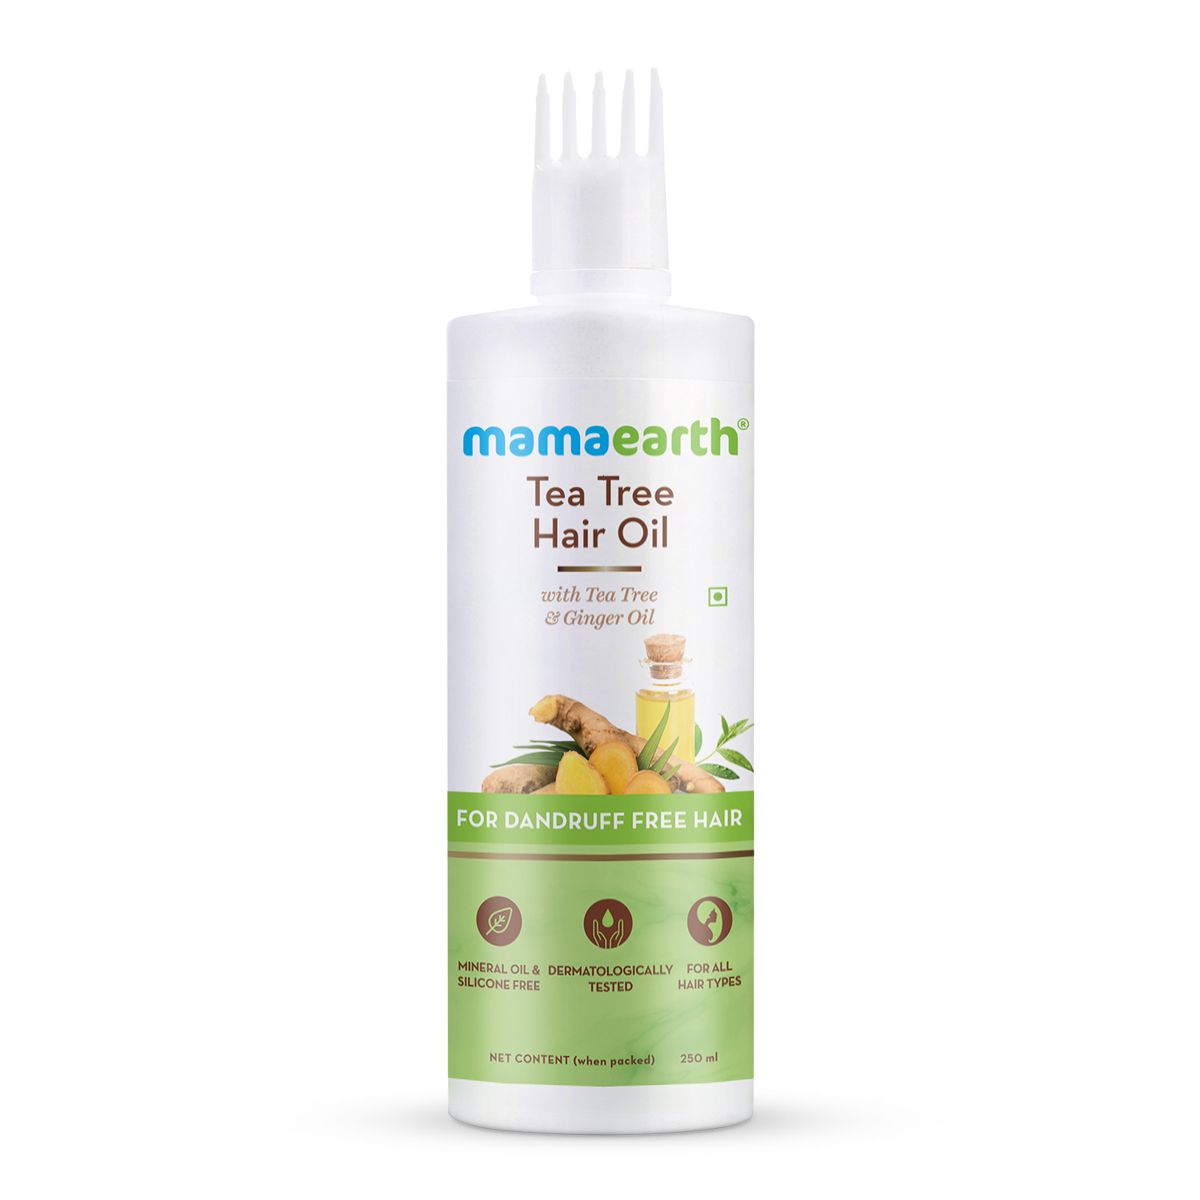 Mamaearth Tea Tree Hair Oil Better Than Others tea tree oil for dandruff Available In The Market